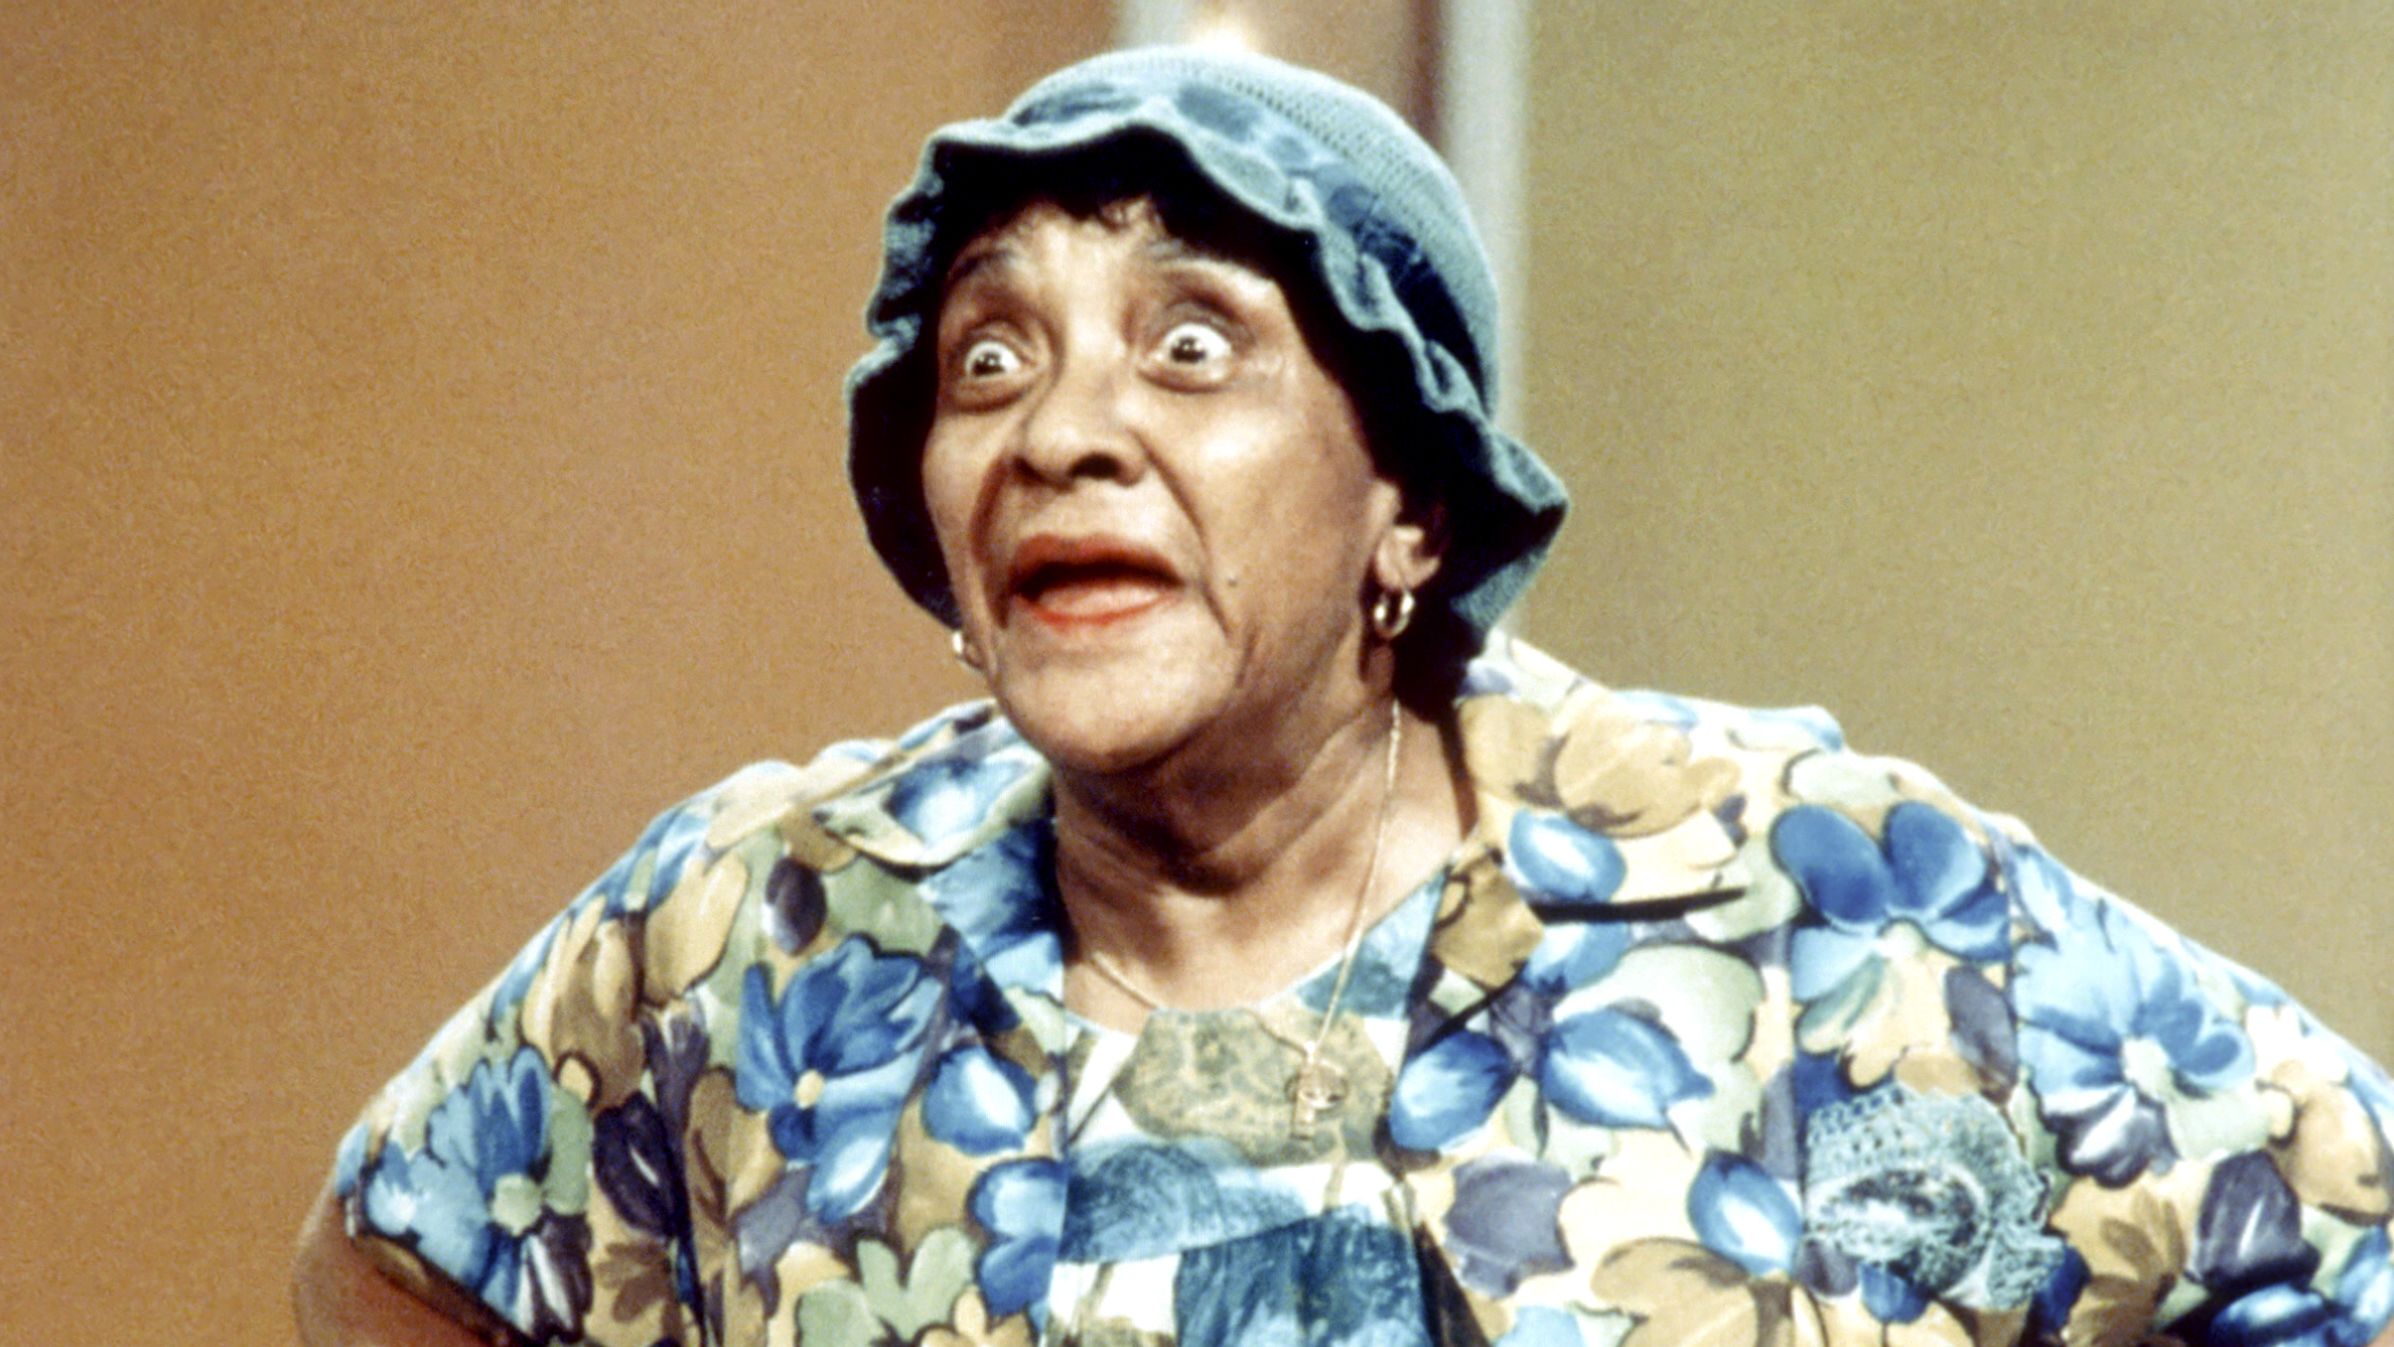  Jackie Moms Mabley was a comic pioneer onstage and an open lesbian offstage. Friends say she didn't try to hide her idenity.